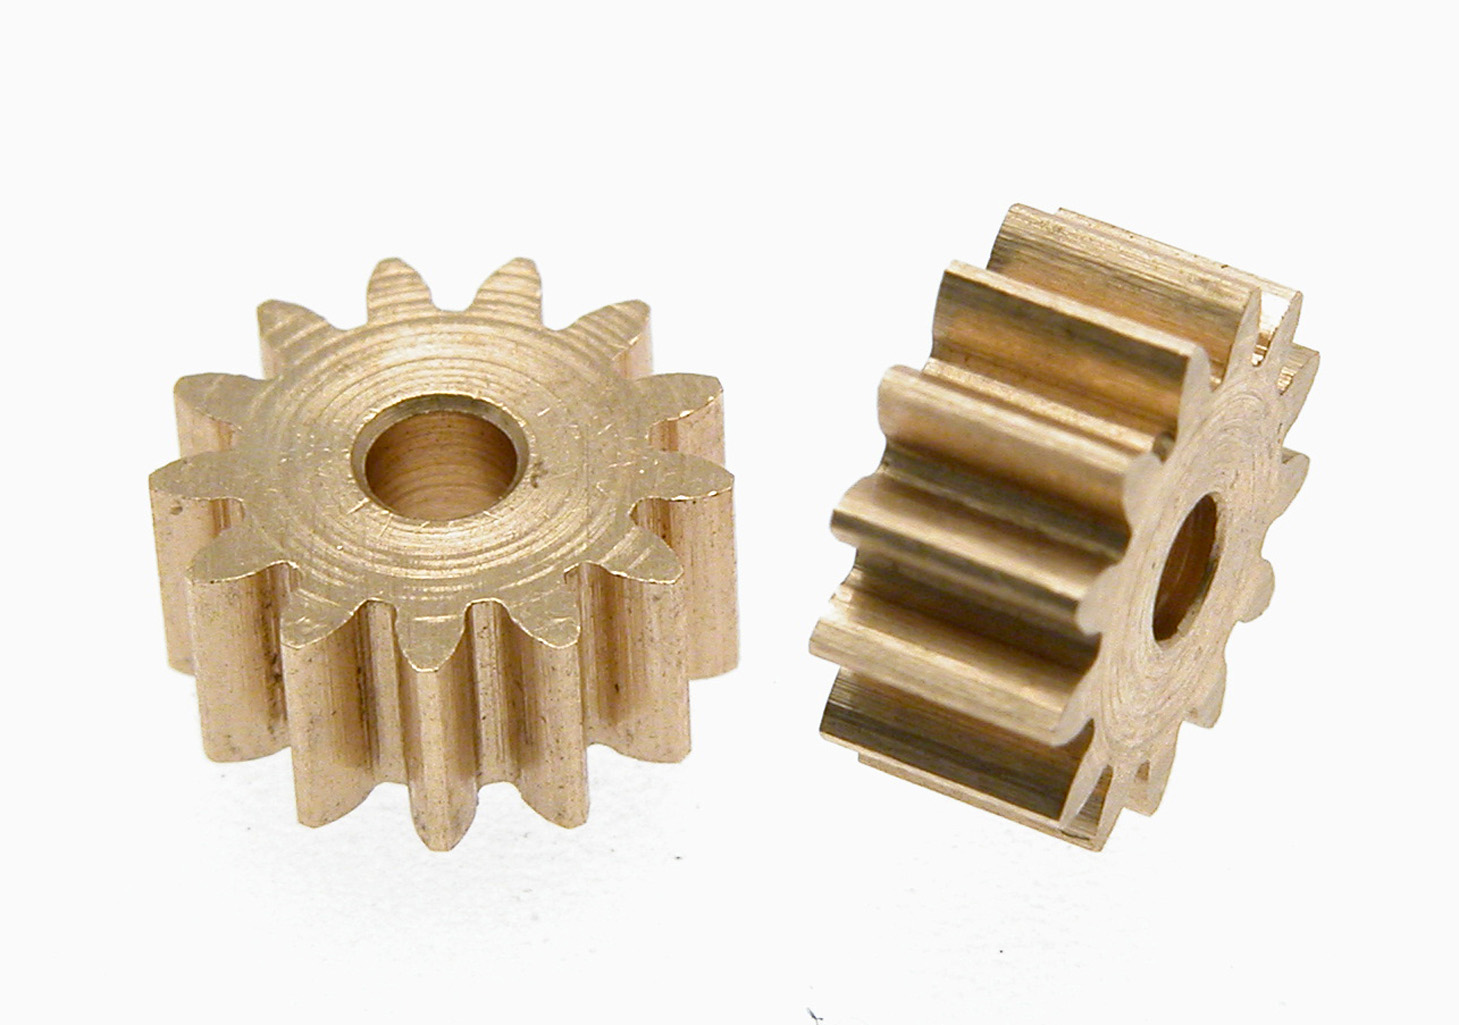 SC-1196 Brass Pinion 13T M50 7.75mm dia. for 2mm Motor Shaft